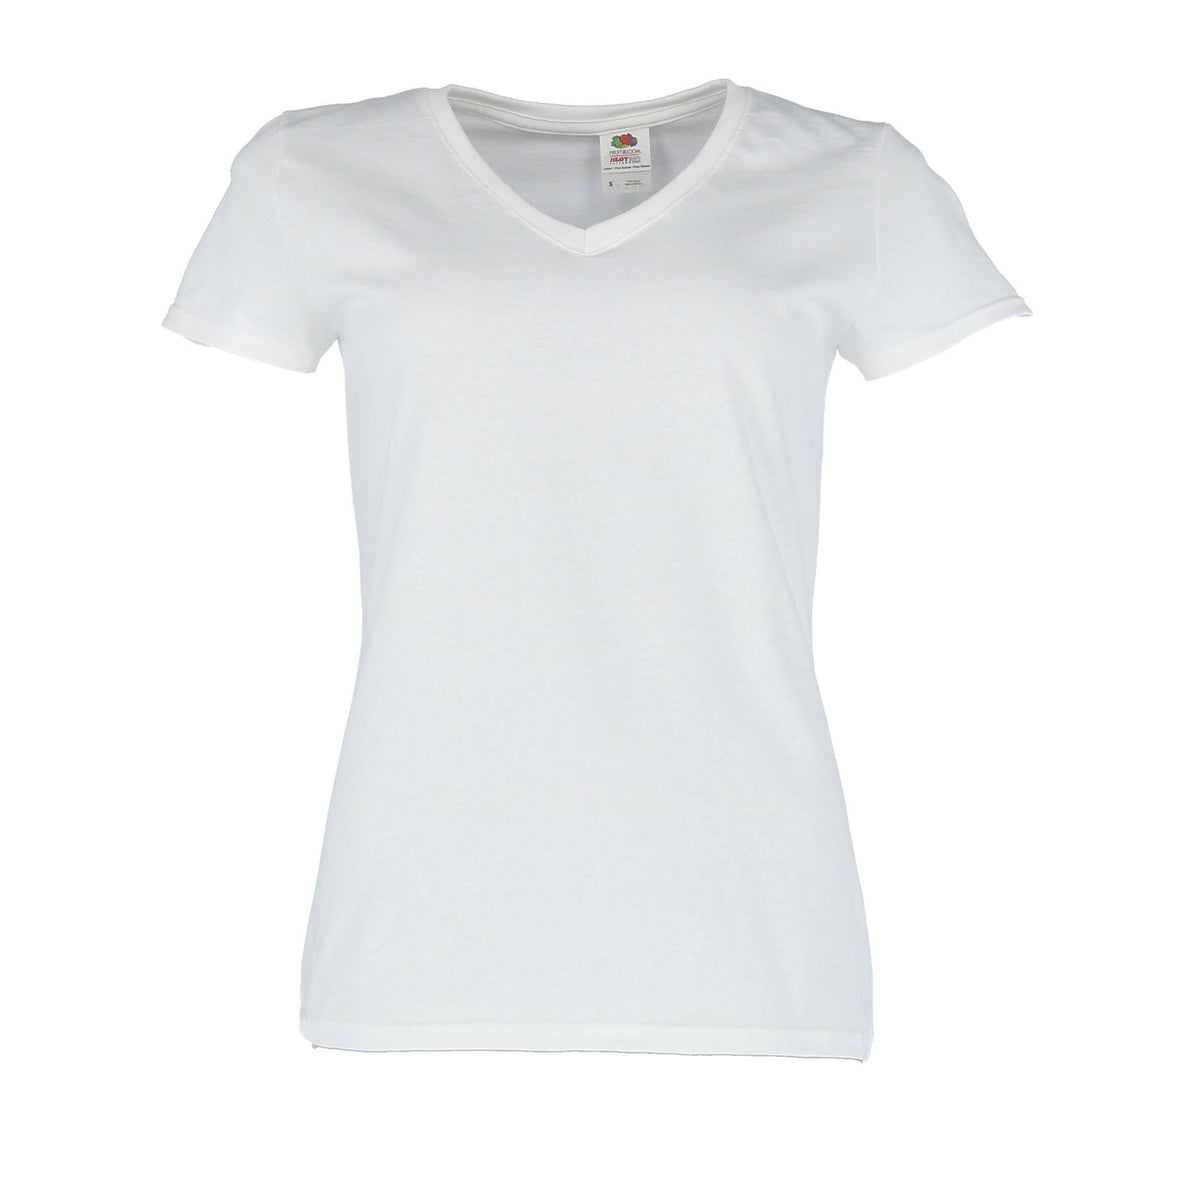 Women's Cotton V Neck Tee Shirt by Fruit of the Loom | T-Shirts at ...